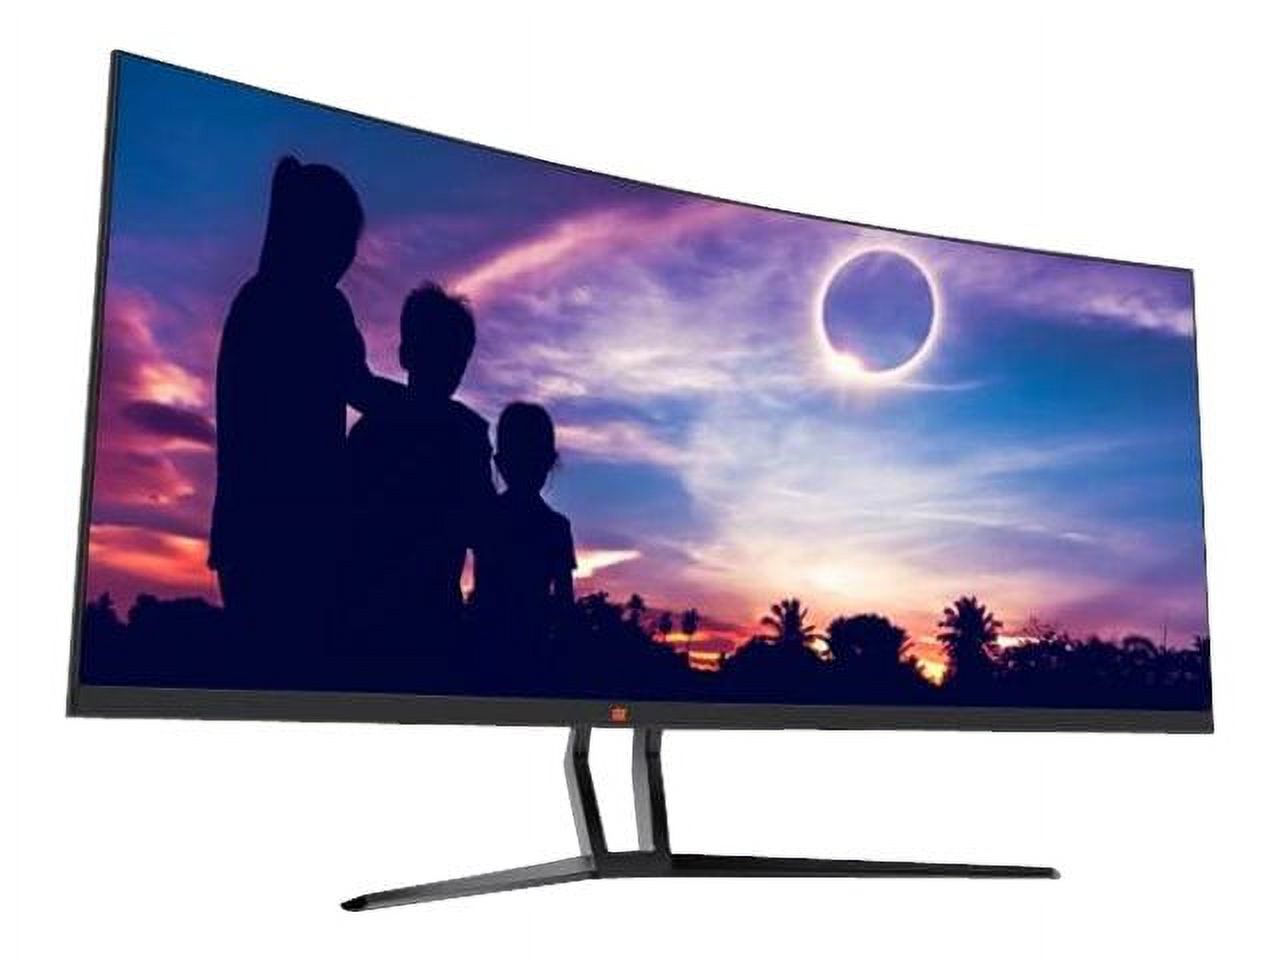 Deco Gear 35" Curved Ultrawide LED Gaming Monitor WQHD Display 3440x1440 21:9 100Hz - image 1 of 4